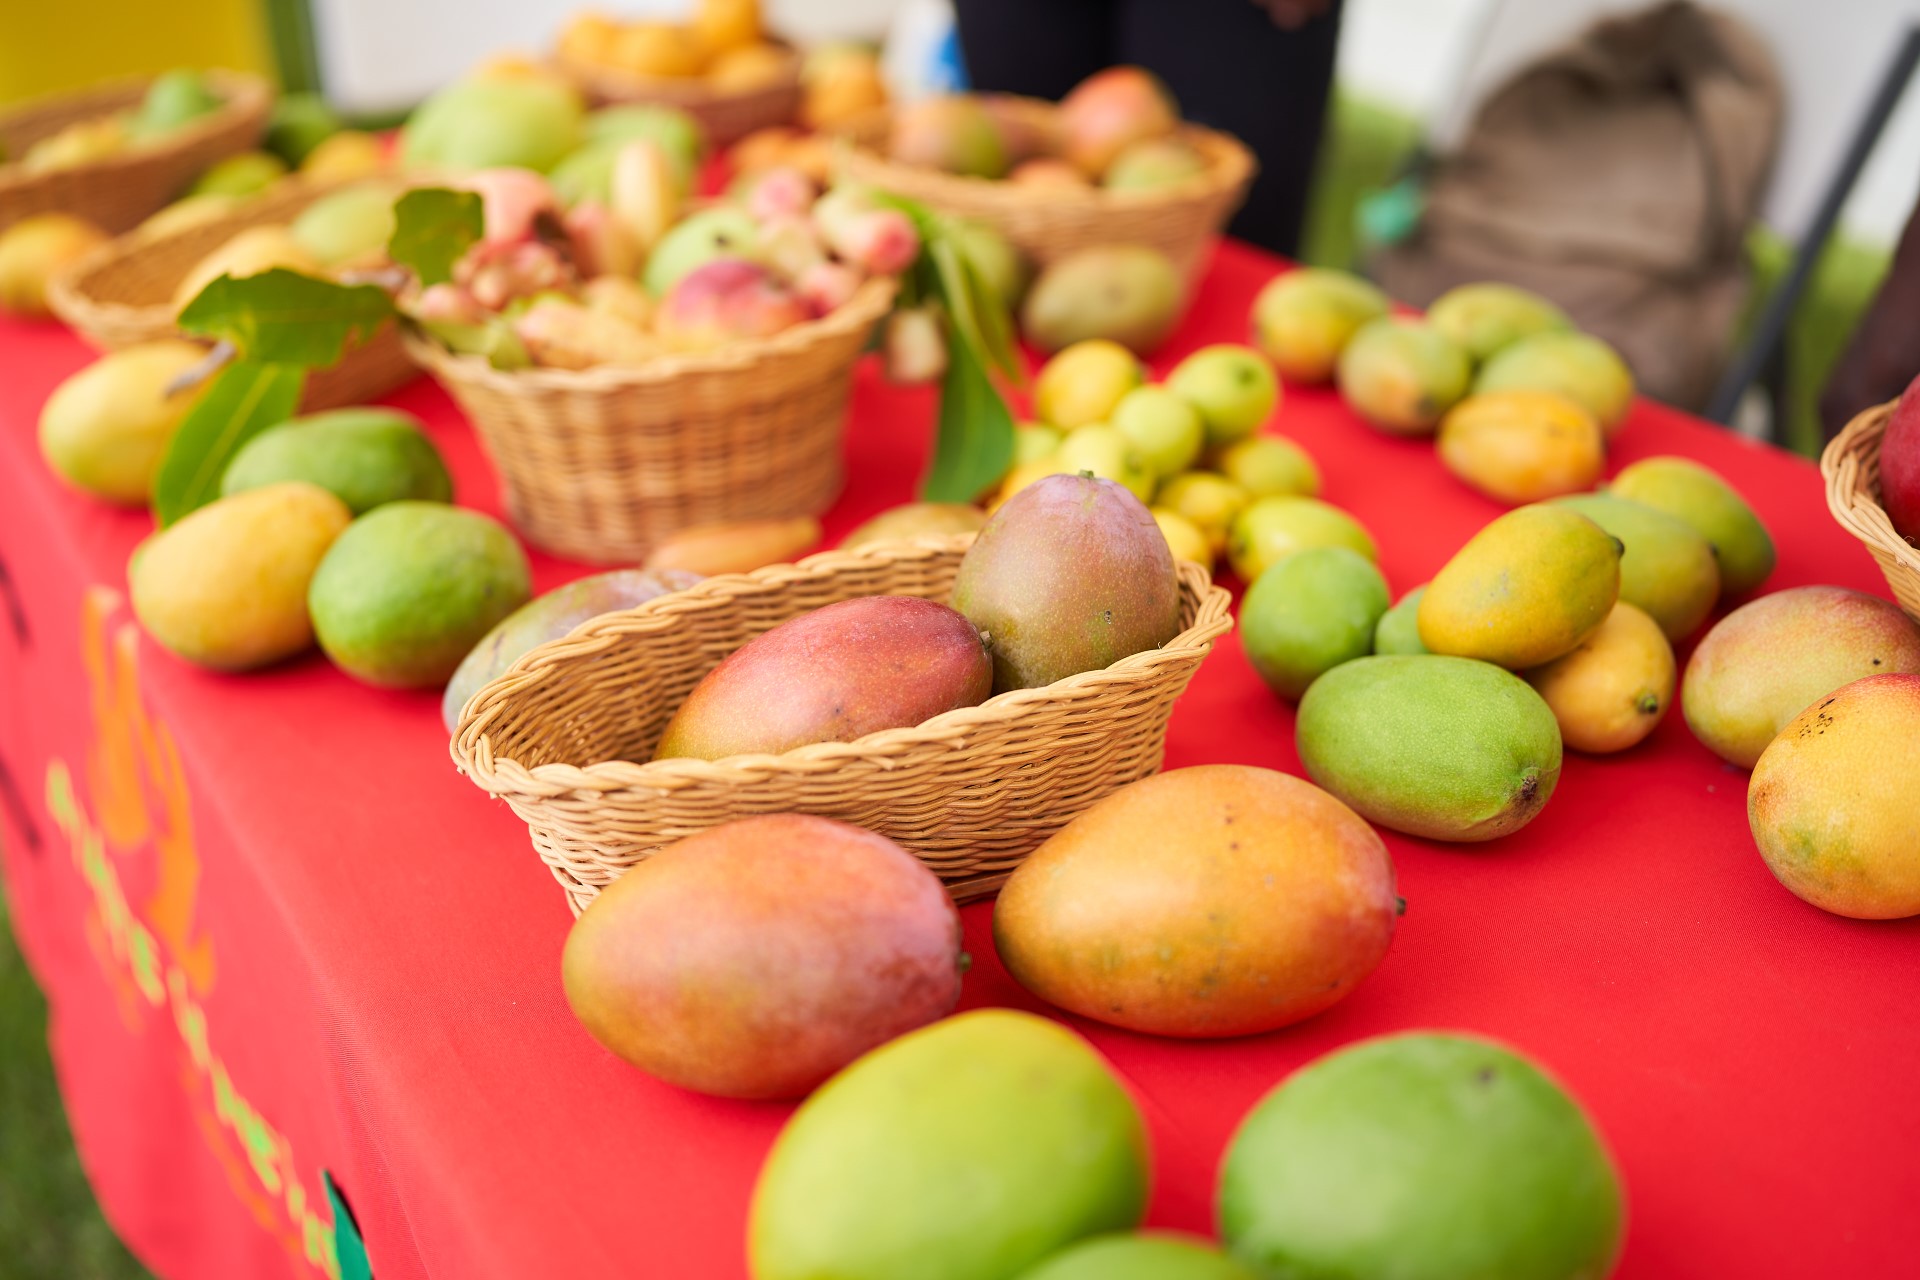 Some of the local mango varieties which awaits patrons during the Nevis Tourism Authority’s 9th annual Nevis Mango Festival